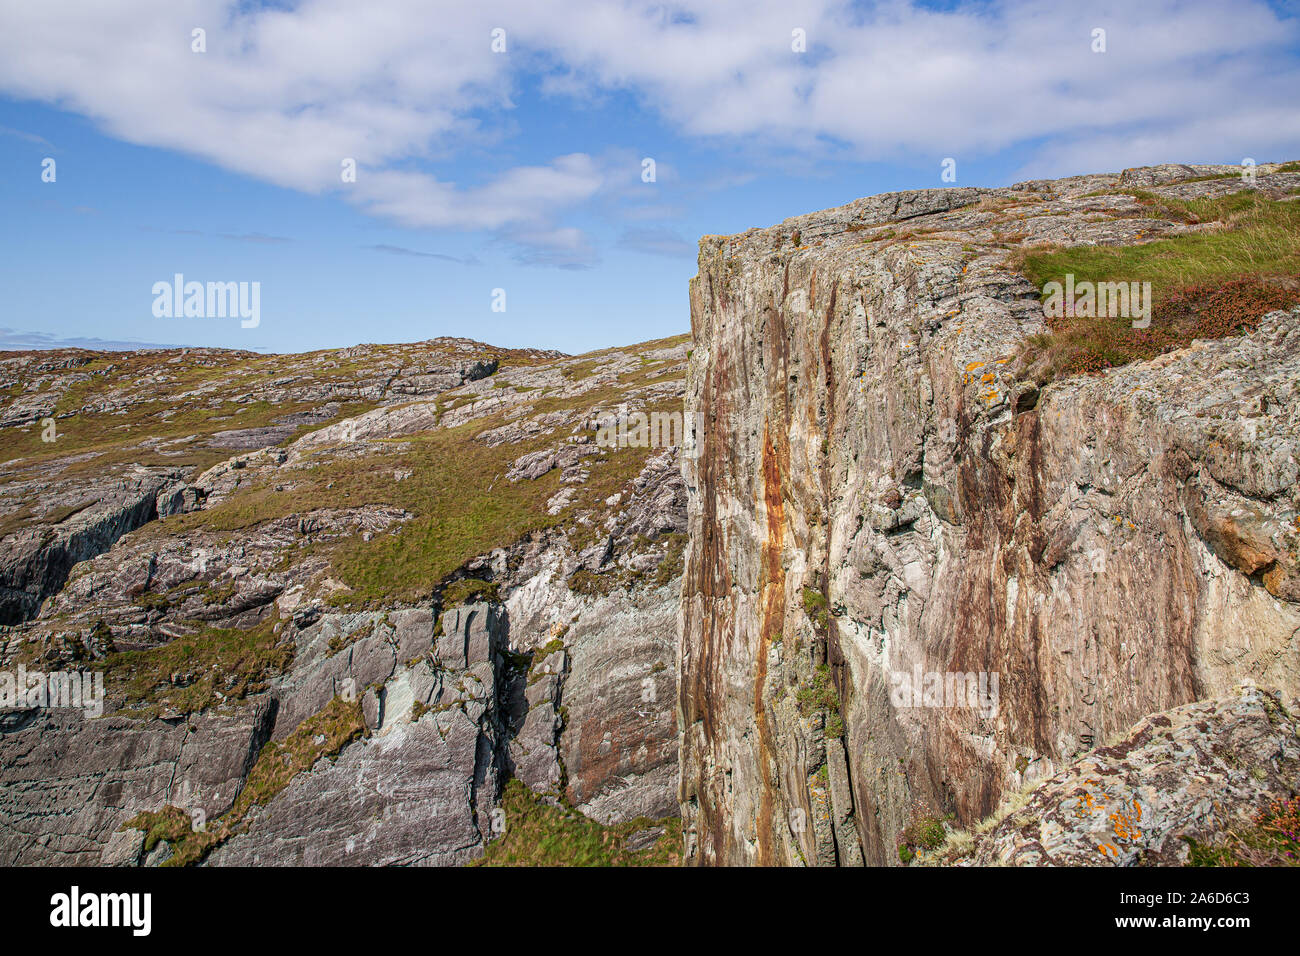 Dramatic cliffs at the Thee Castle Heads in Dunlough, West of Ireland. Blue sky with clouds. Summer. Stock Photo